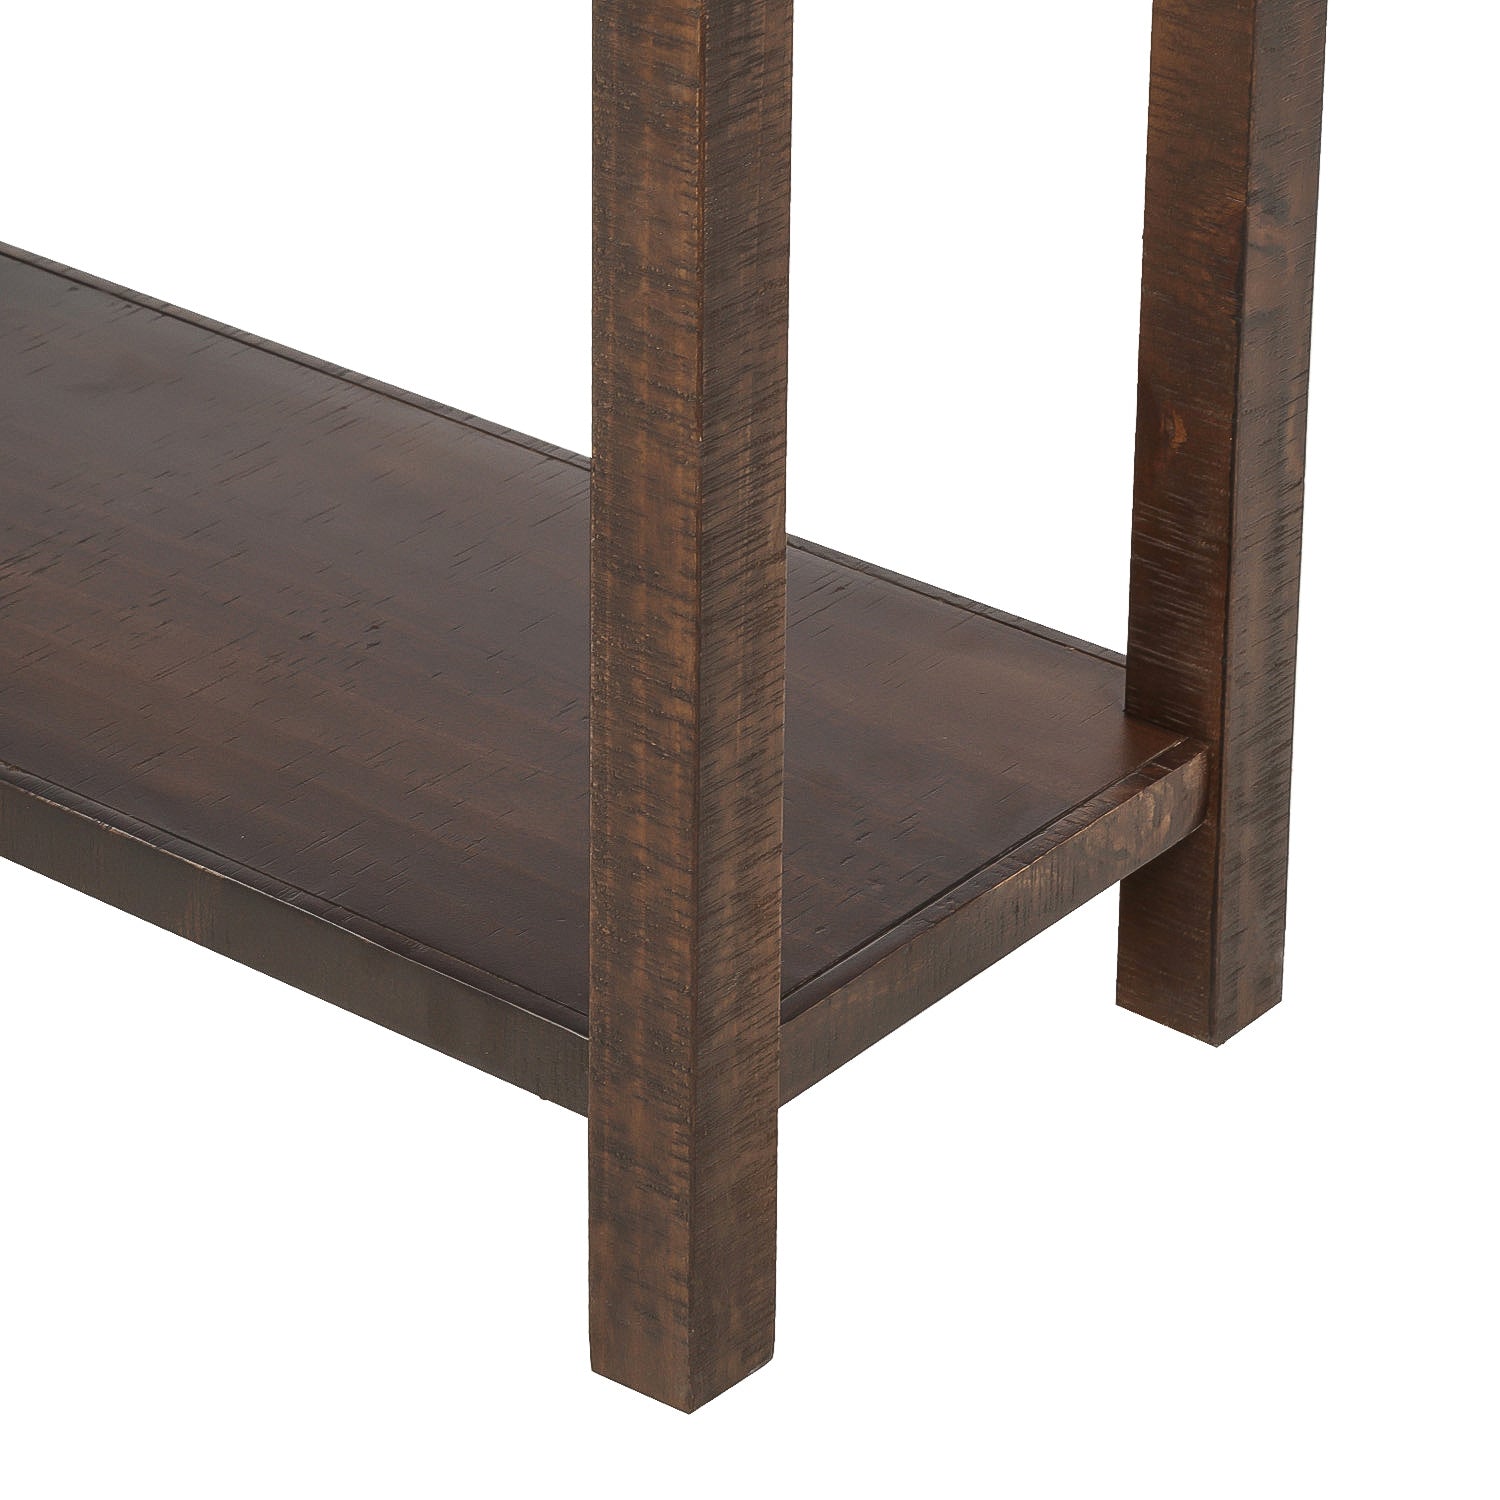 Rustic Brushed Texture Entryway Table Console espresso-solid wood